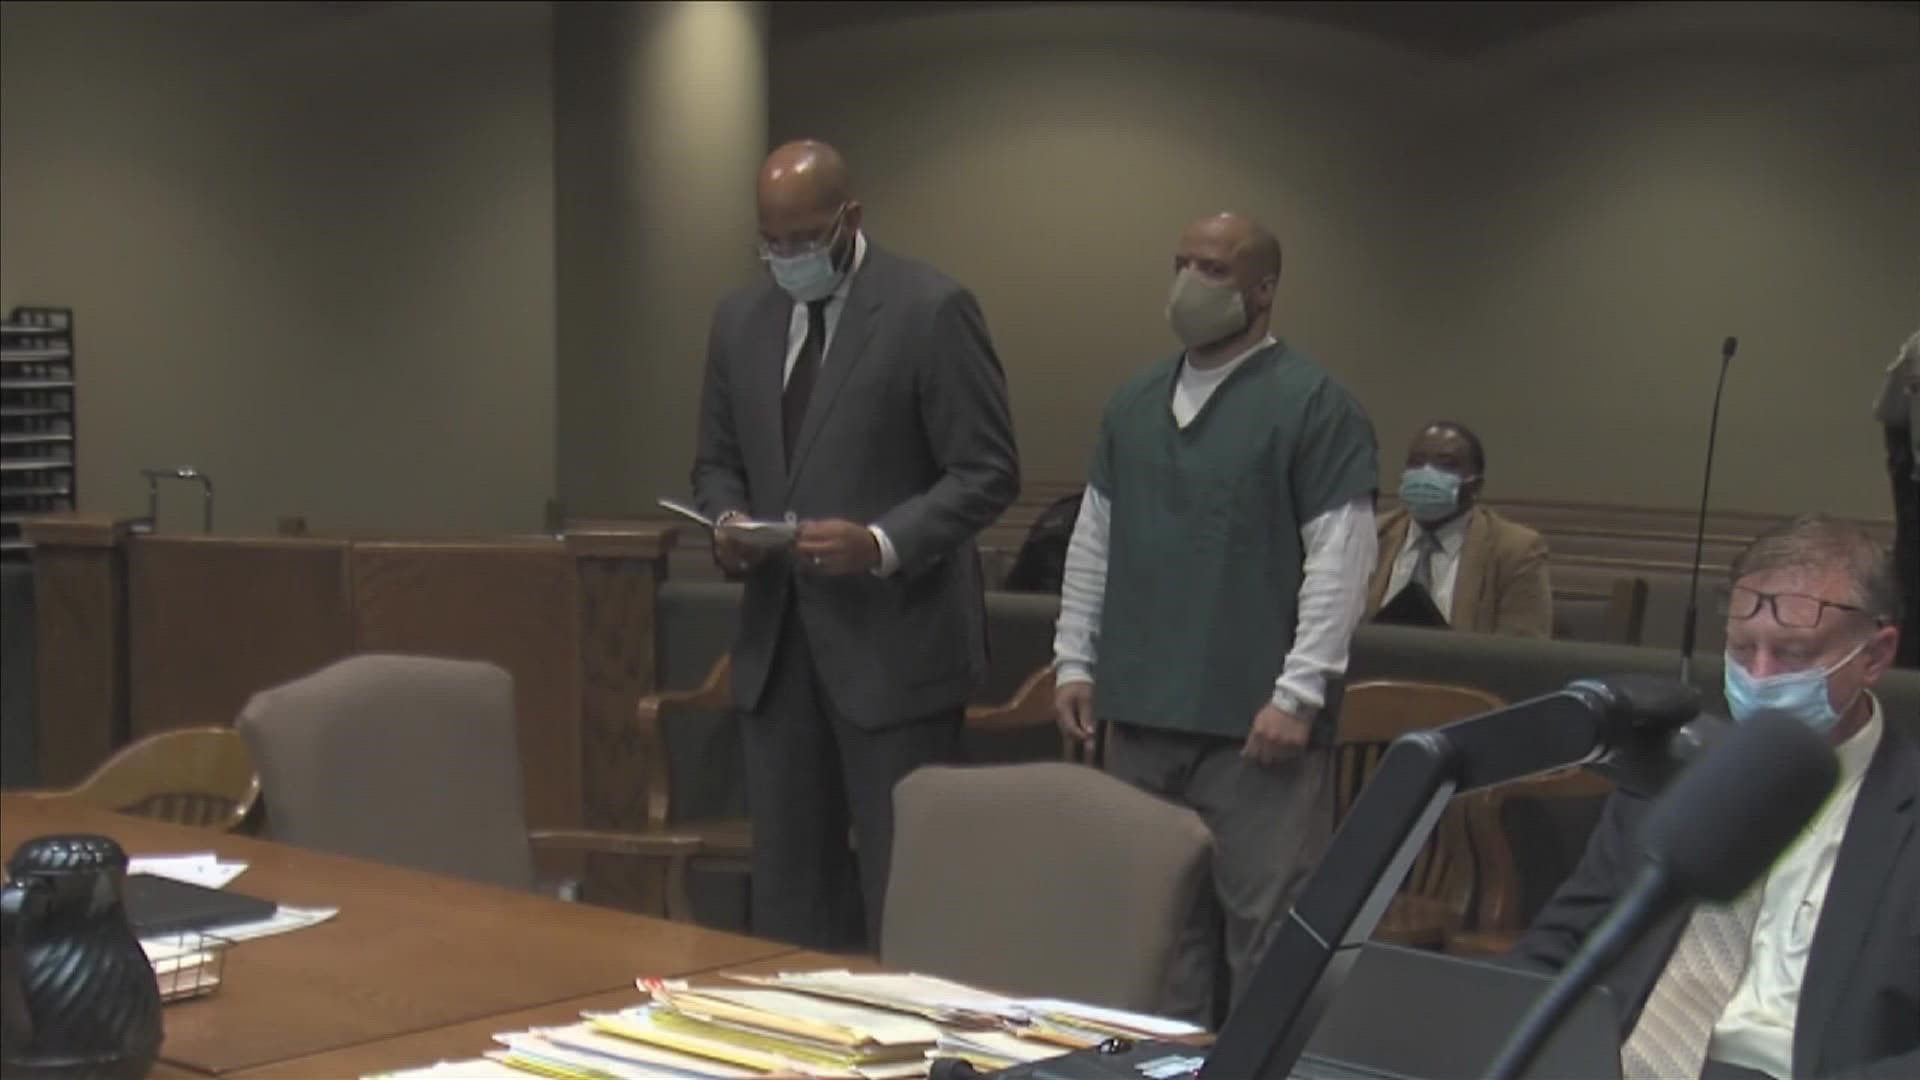 12 years after former Memphis Grizzlies player Lorenzen Wright was murdered, his accused killer is set to stand trial. 8 women and 7 men were selected as jurors.